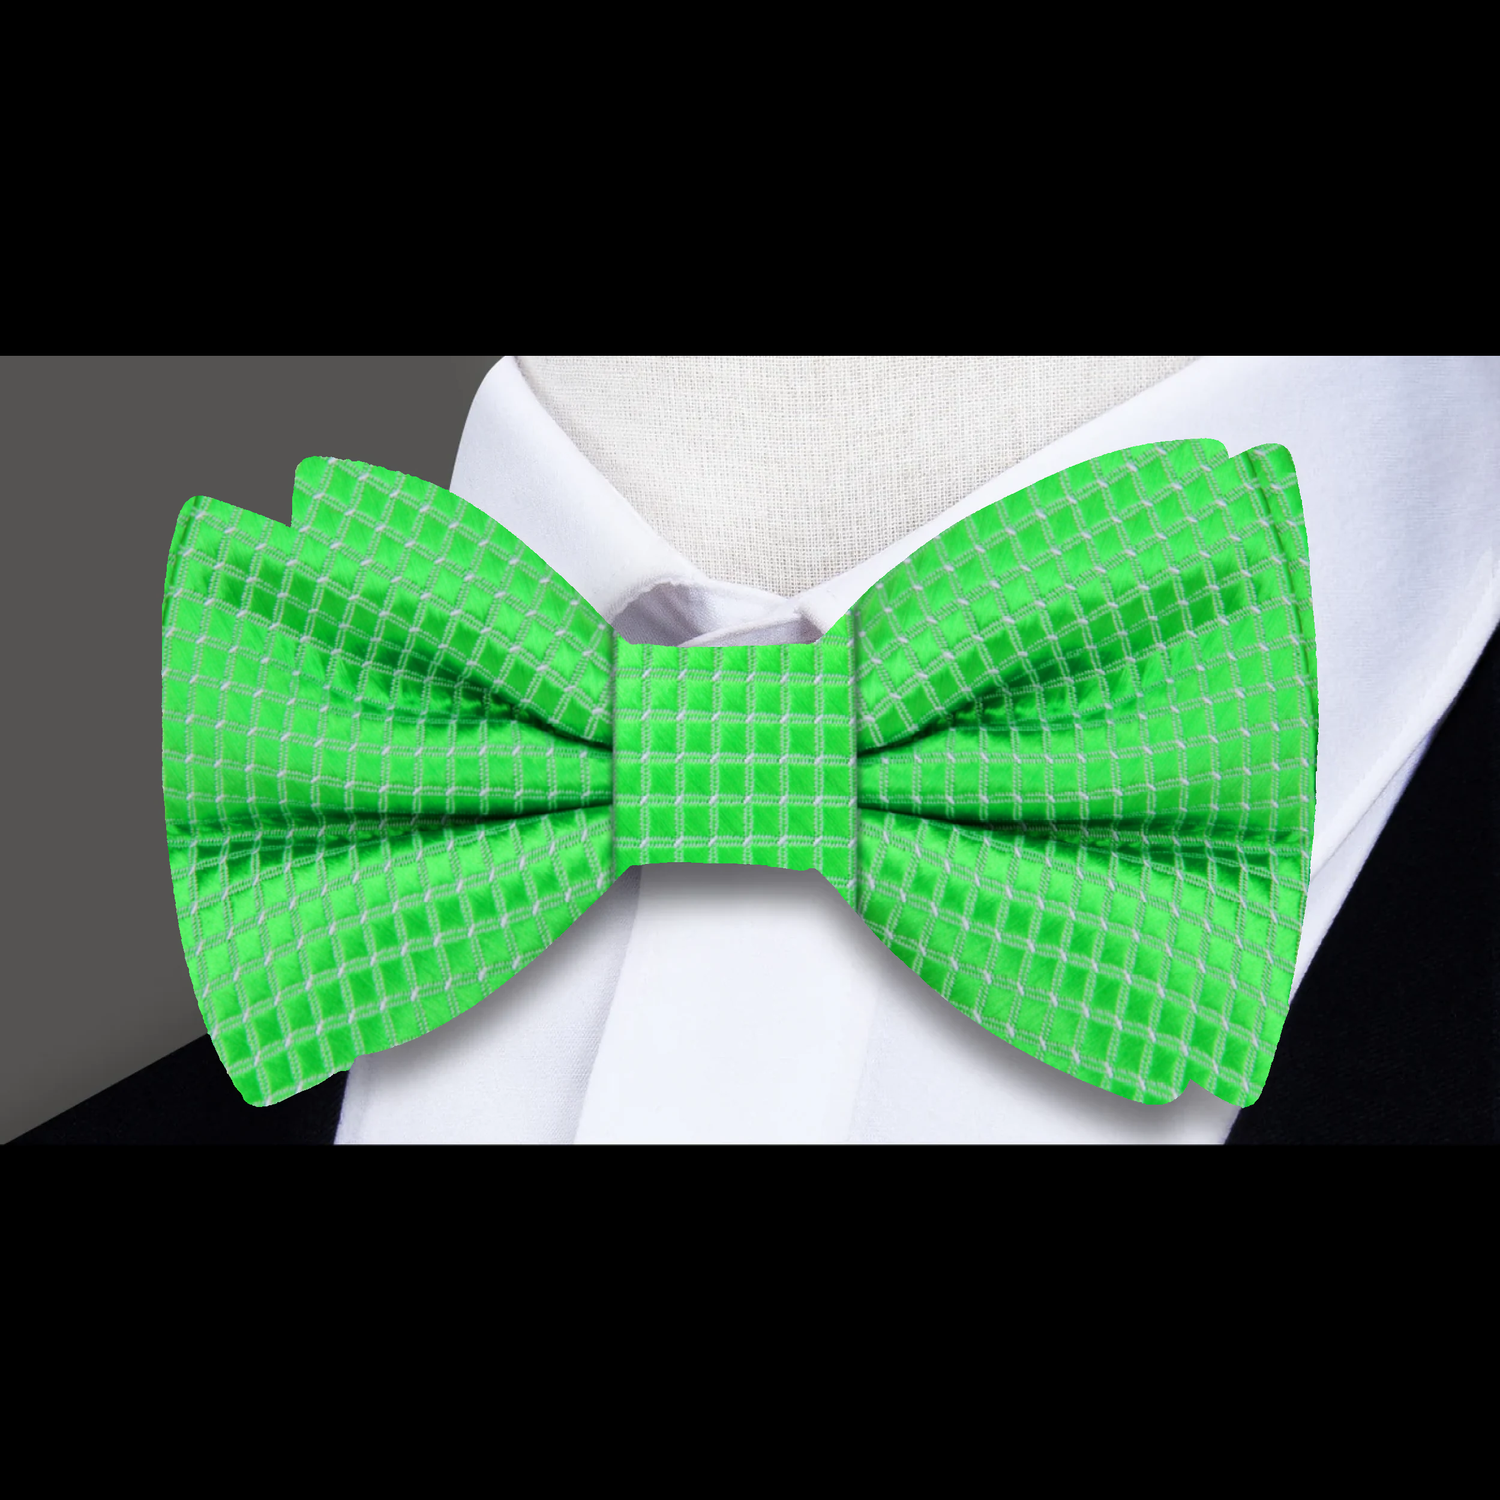 Green with White Geometric Texture Bow Tie